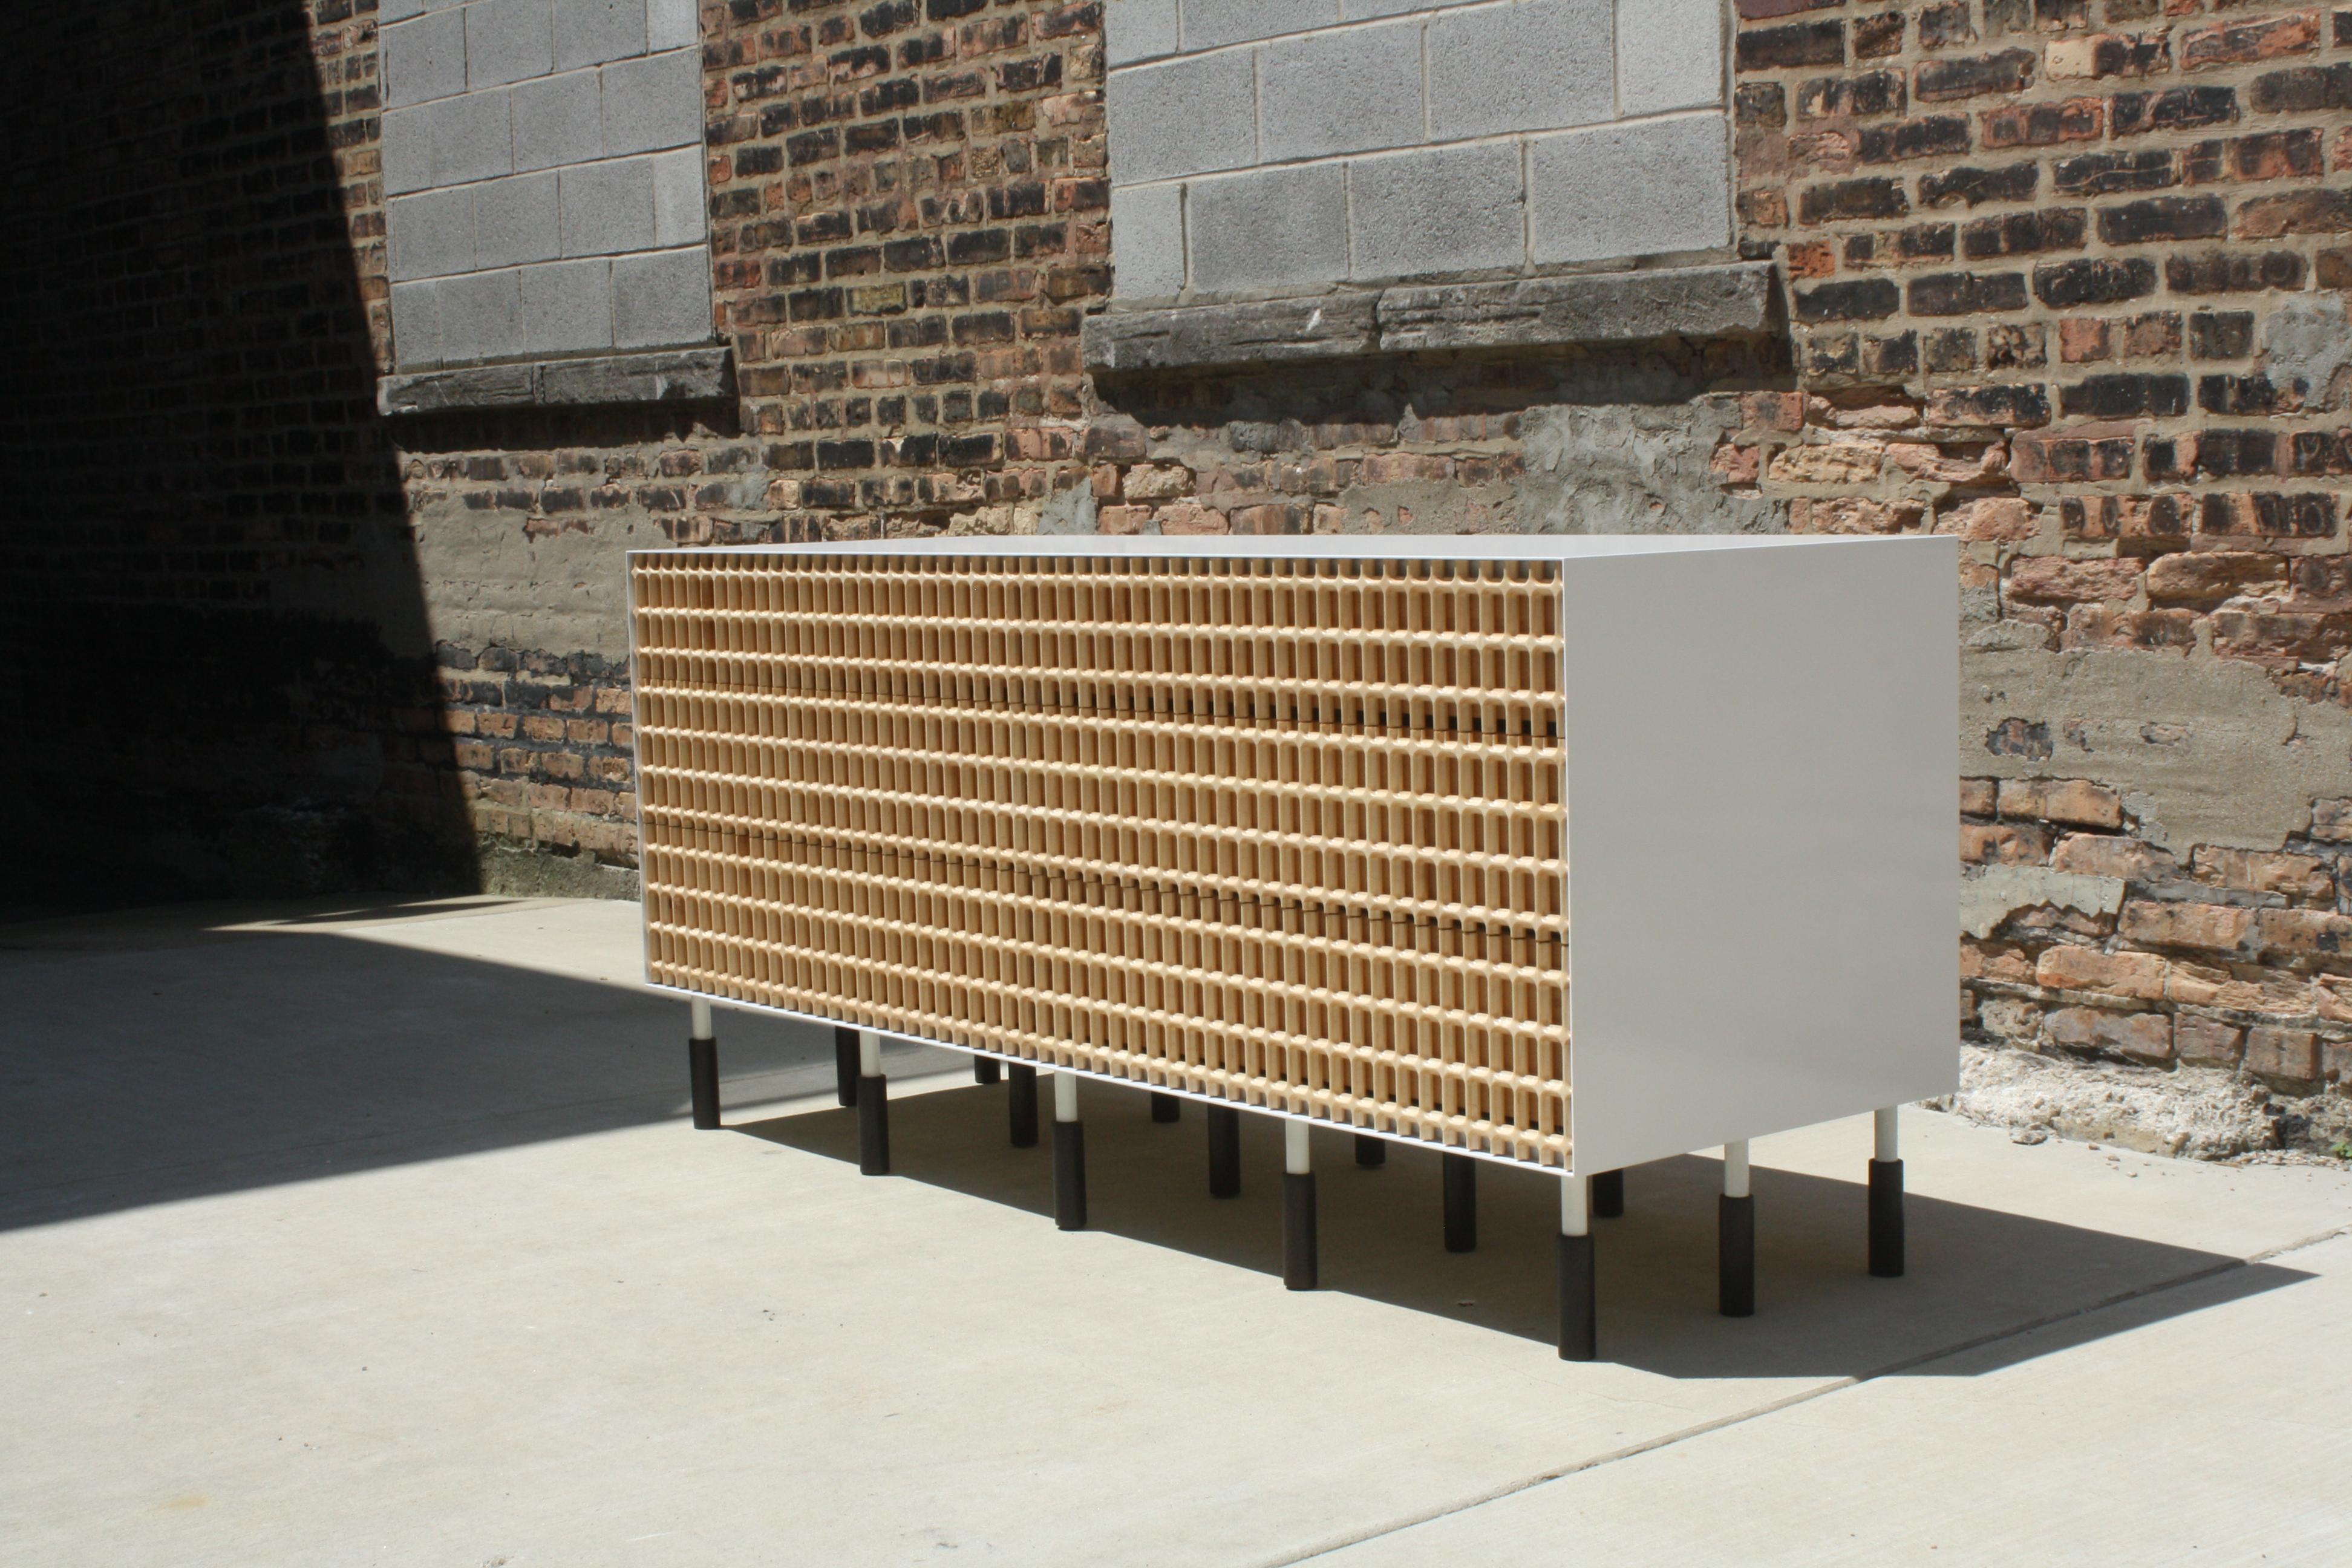 Carved maple lattice, white enameled steel, and oxidized walnut

6 drawers, measures: 72” W x 32” H x 24” D

Inspired by brise-soliel, an architectural feature designed to break the sun by casting shadows, we set out to reference this at